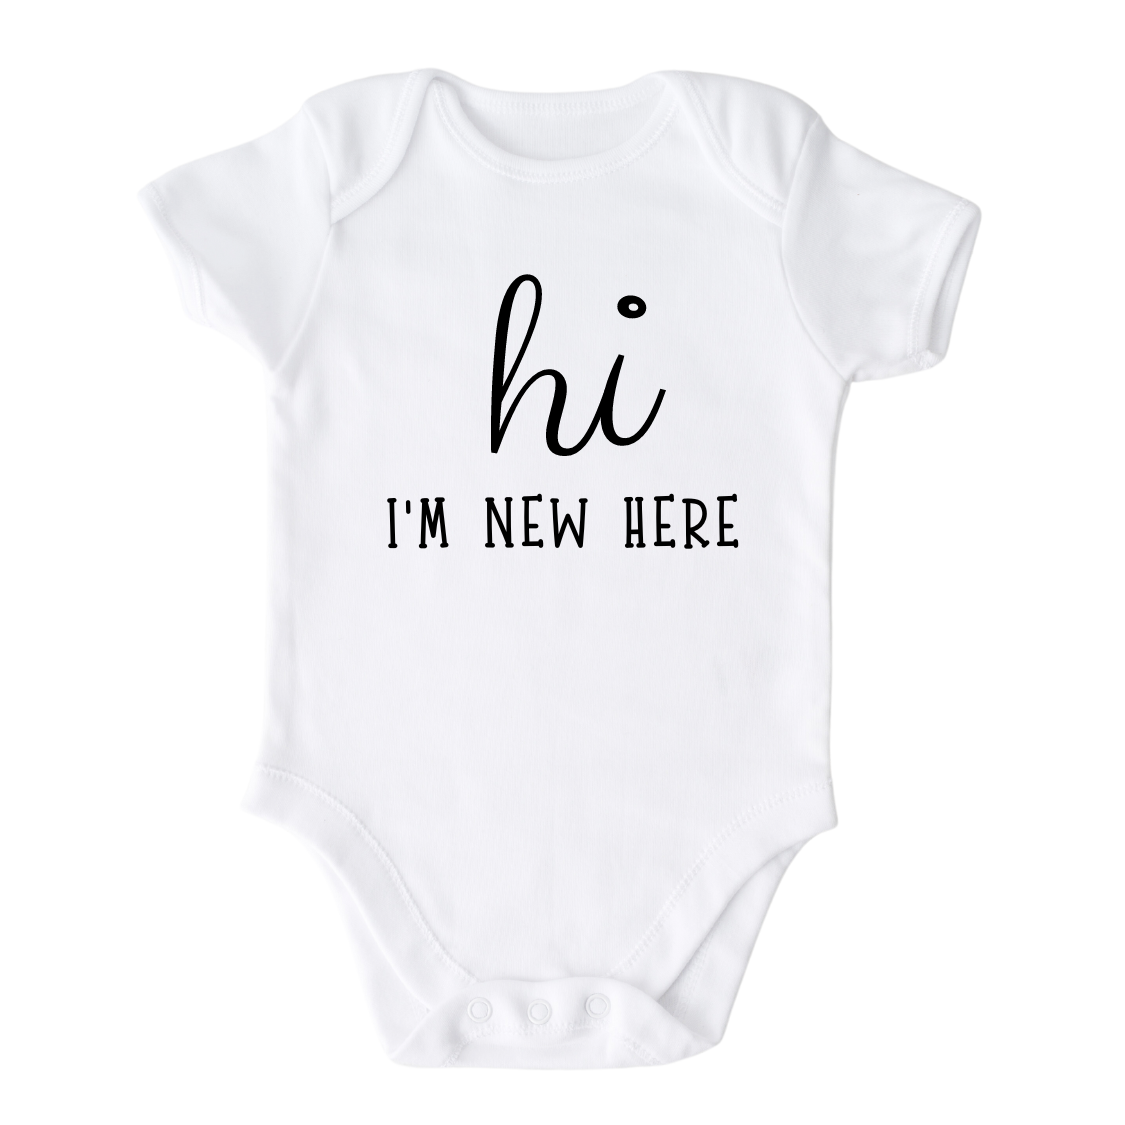 Baby Onesie® Hi I’m New Here Infant Clothing for Baby Shower Gift